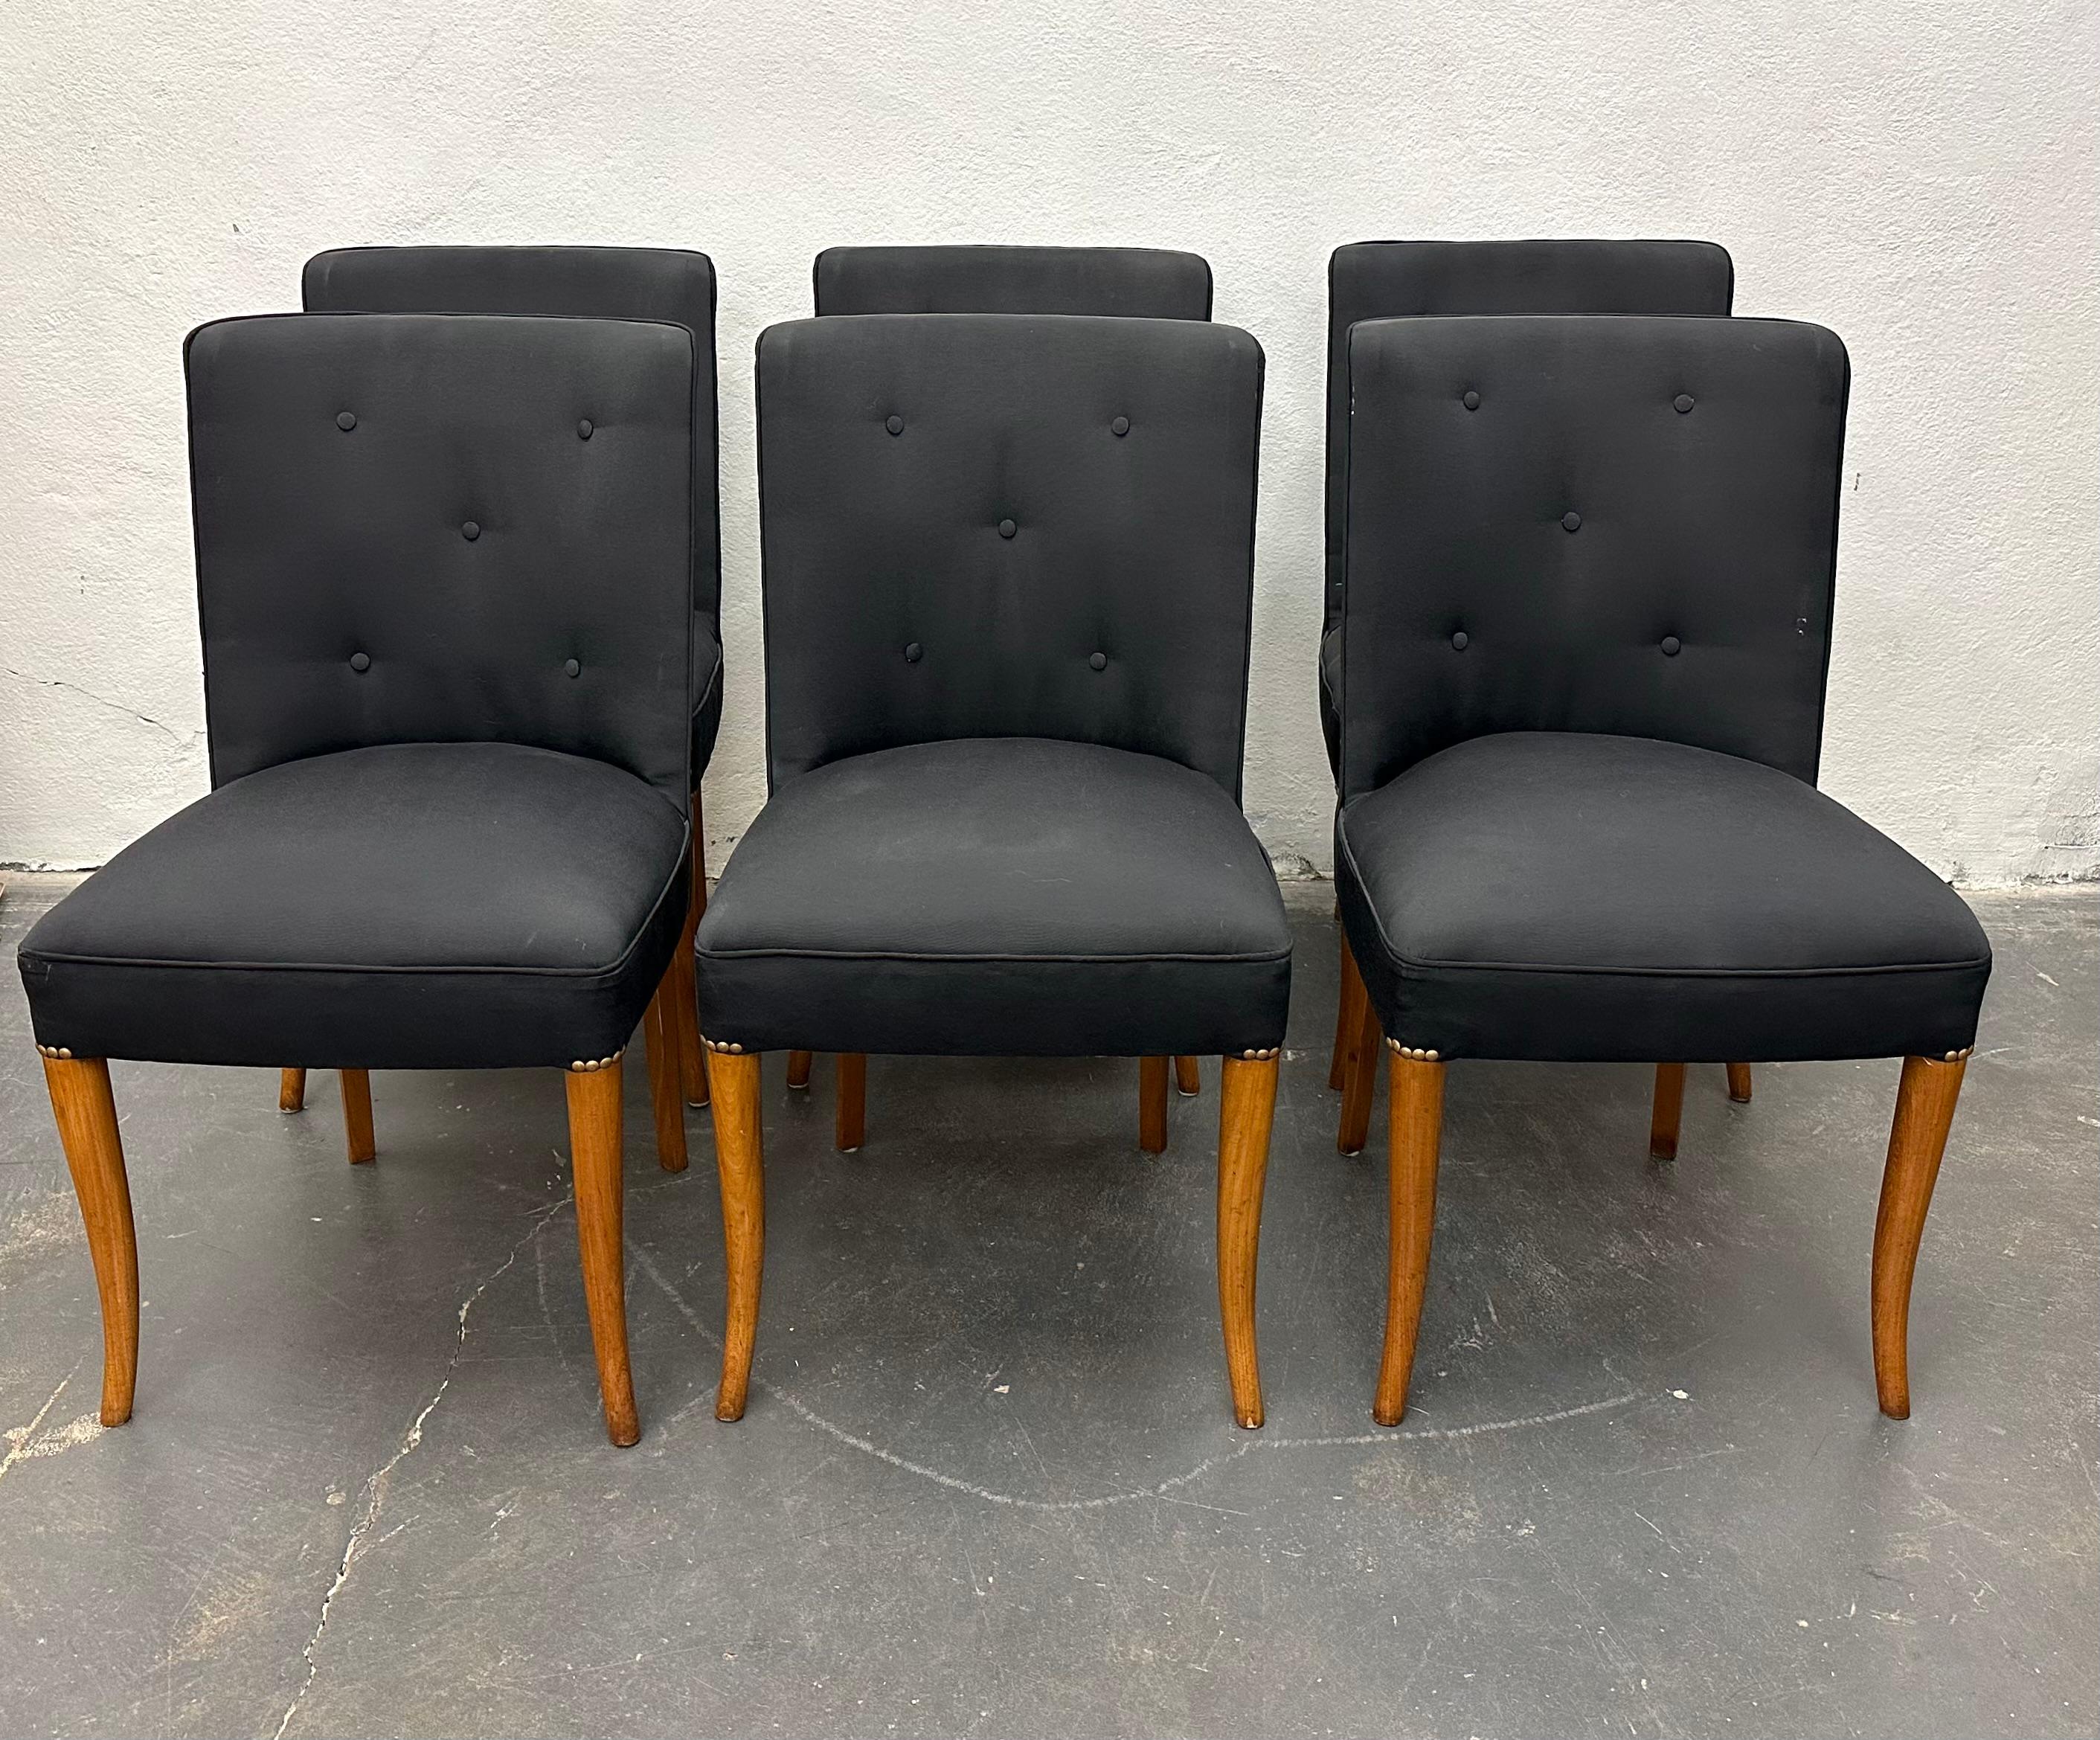 Set of six dining chairs with black silk-upholstered barrel-backed seats with brass rivets on elegantly sabred bleached walnut legs, circa 1930s. From the estate of Alan Moss.